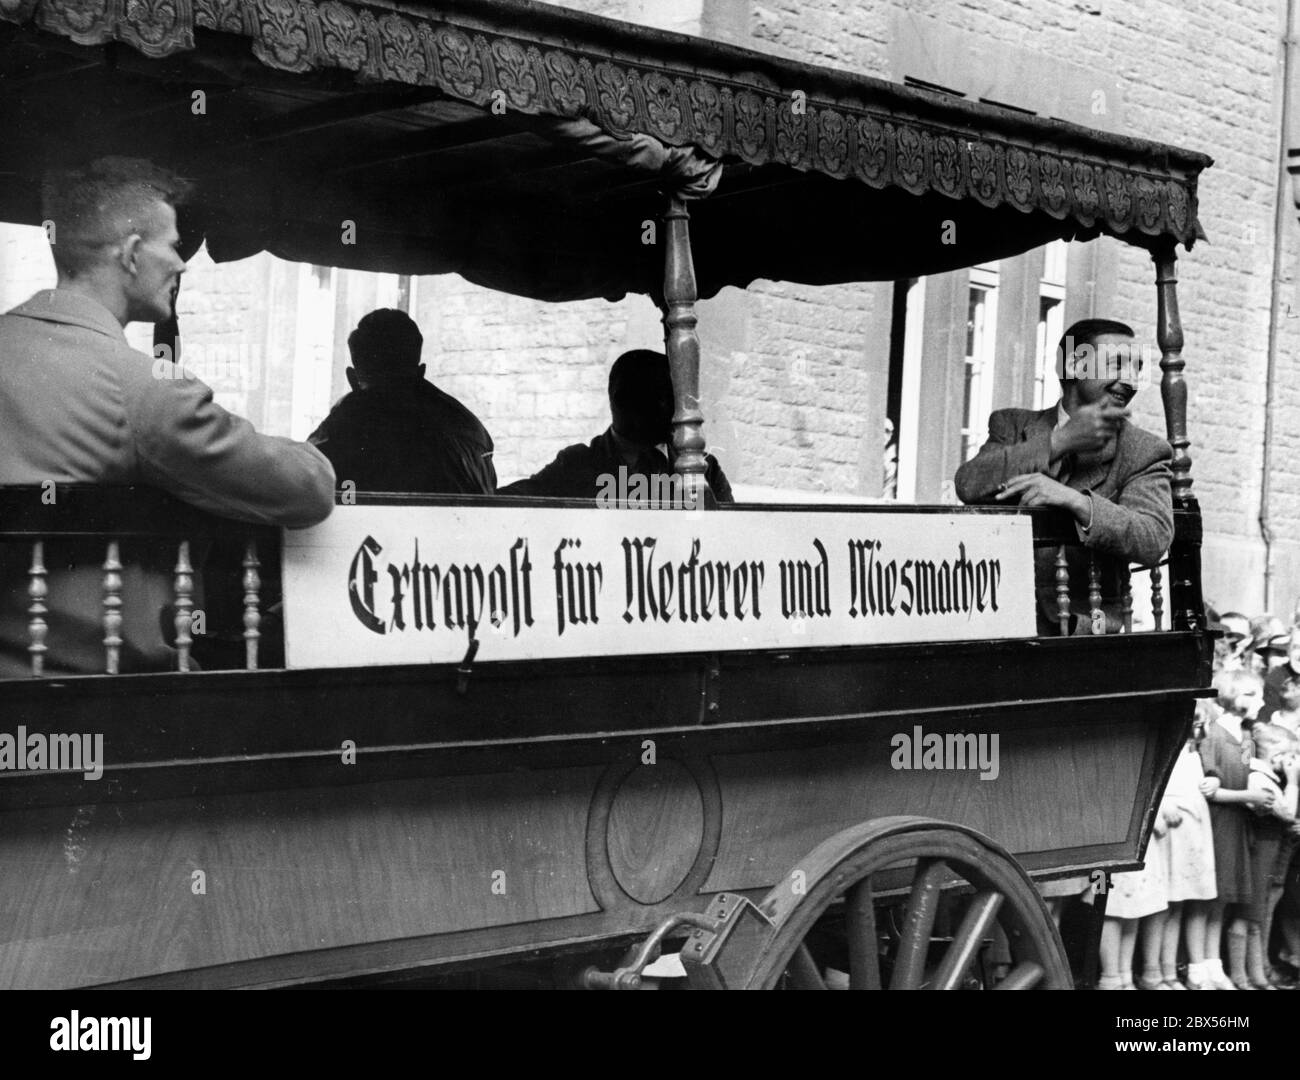 Cart of the procession of the Britzer Rosenfest (Britz Rose Festival) with the slogan 'Special mail coach for complainers and defeatists'. Stock Photo